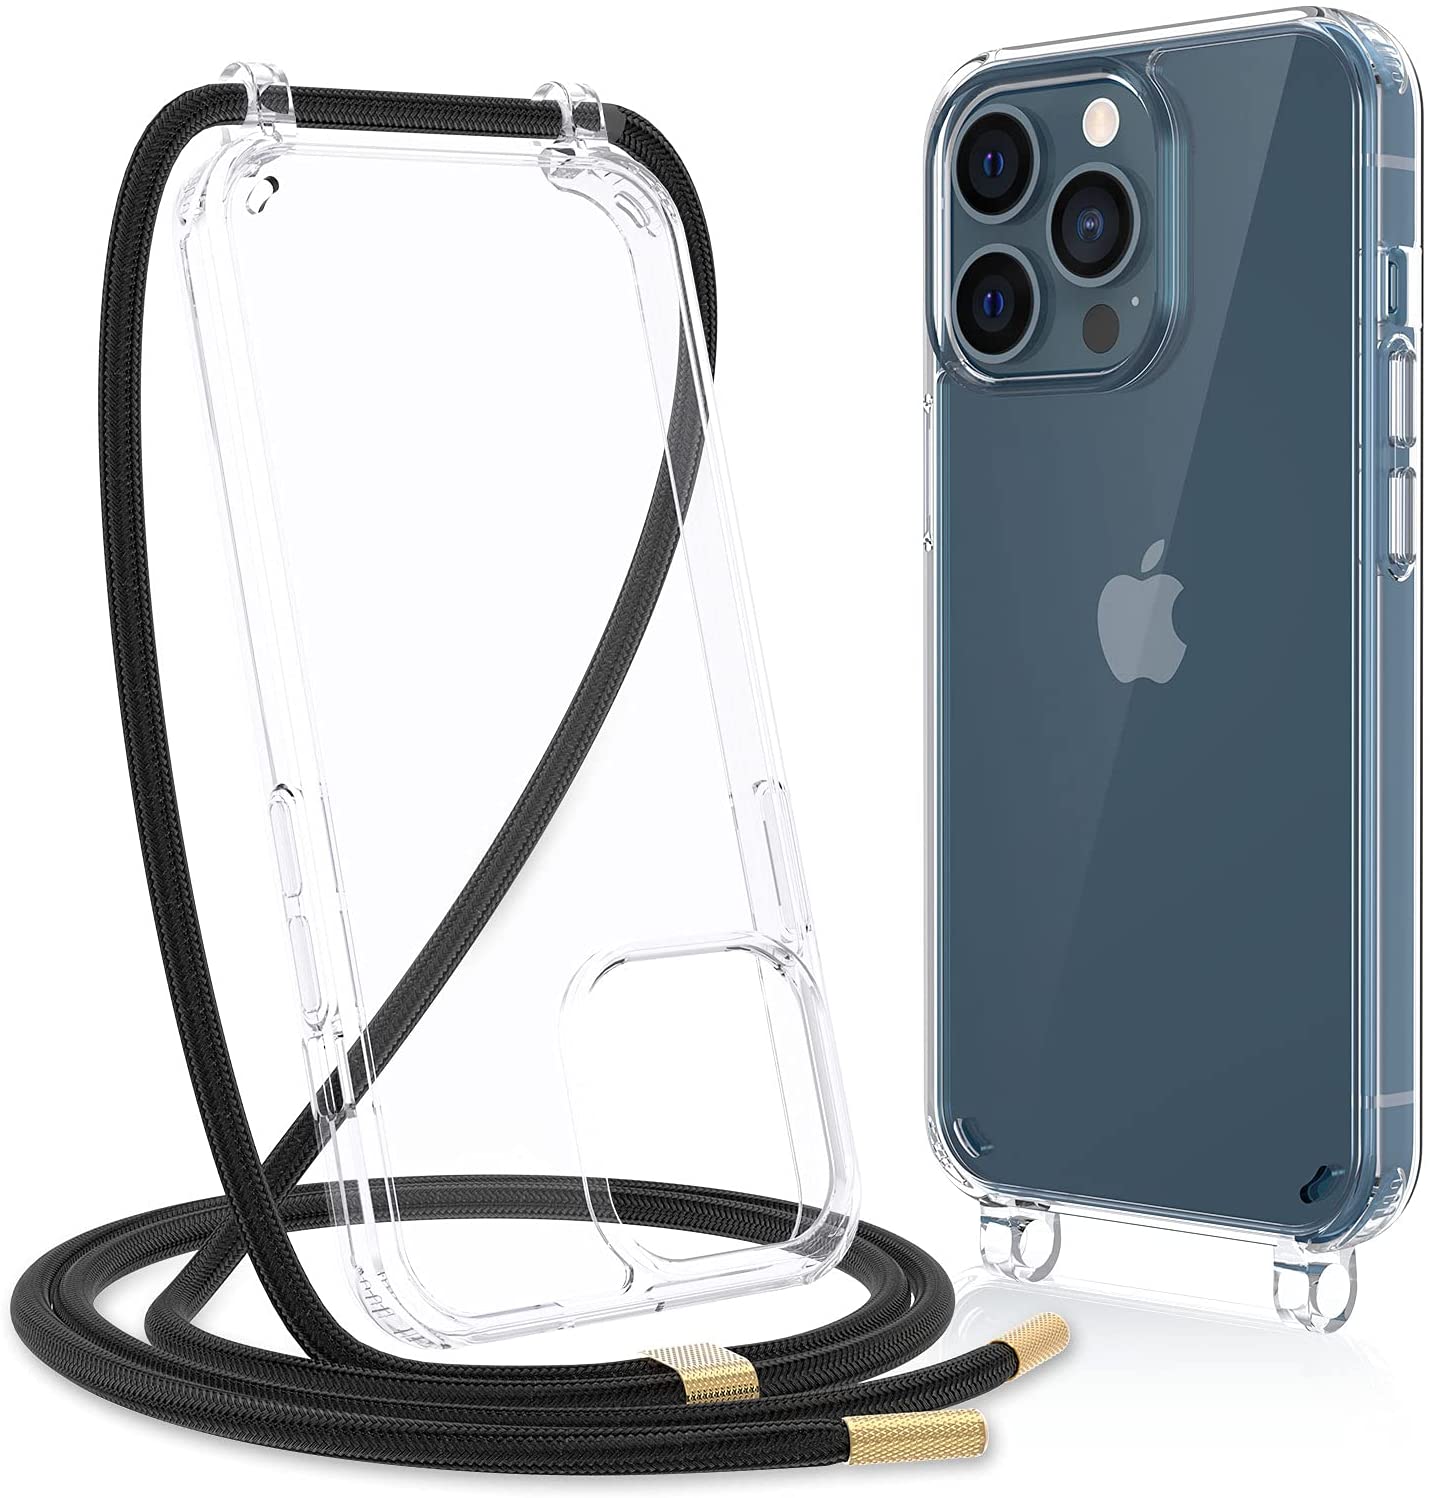 Lanyard cover for iphone